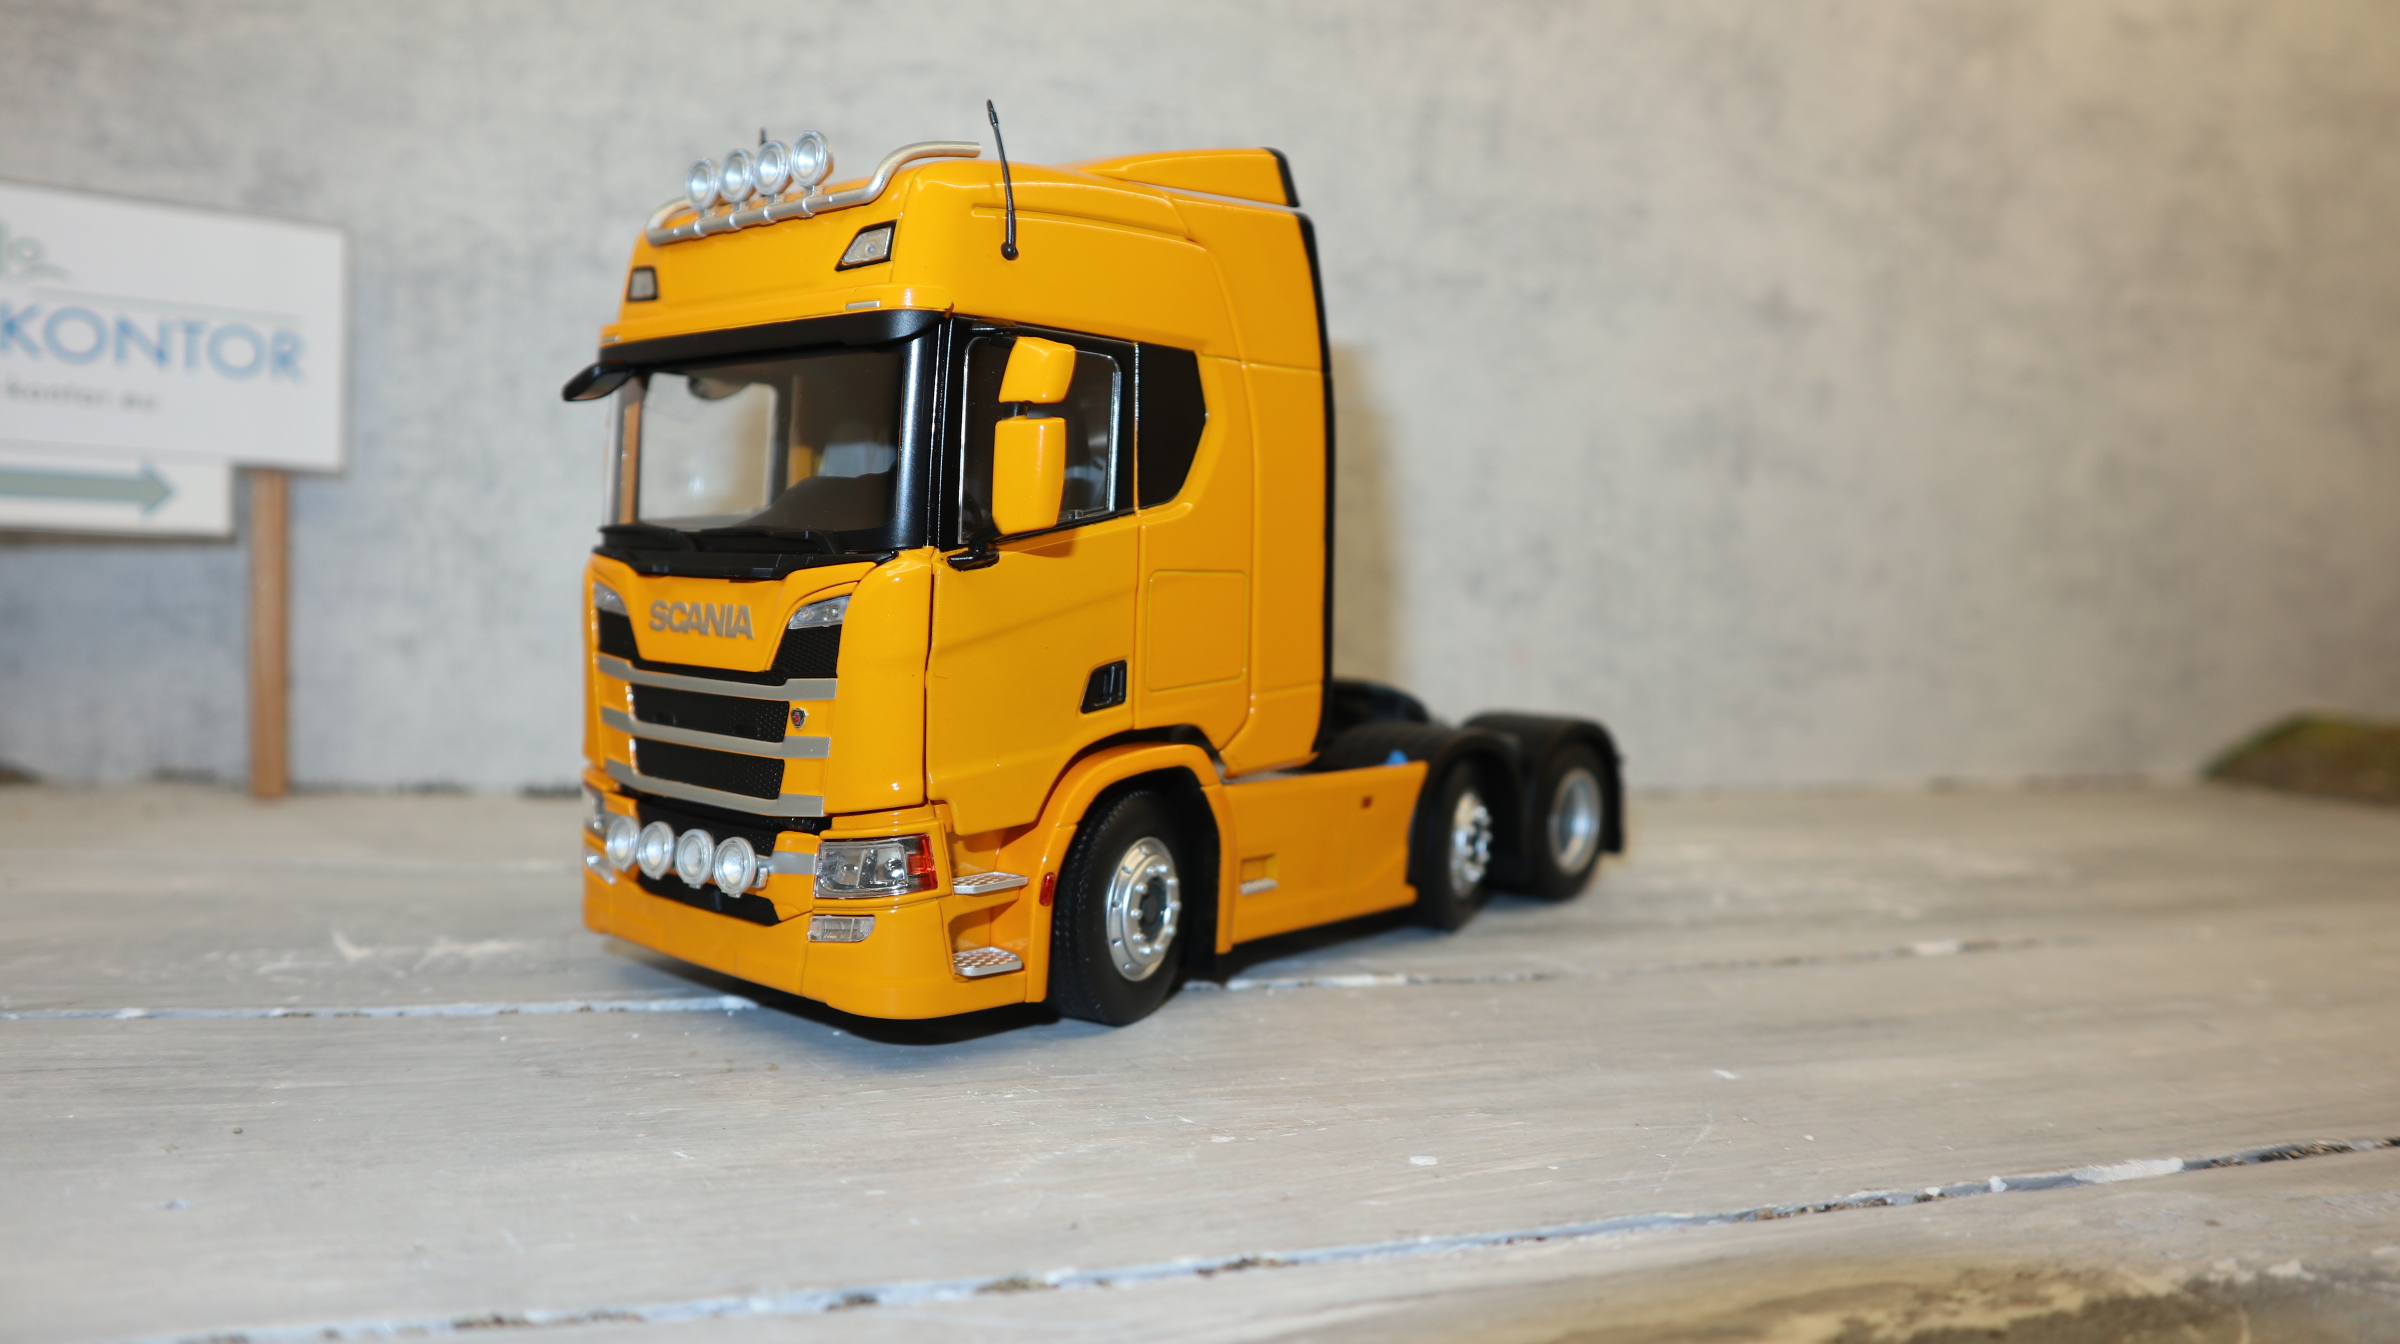 MarGe 2015-04 in 1:32, Scania R500 6x2 in gelb